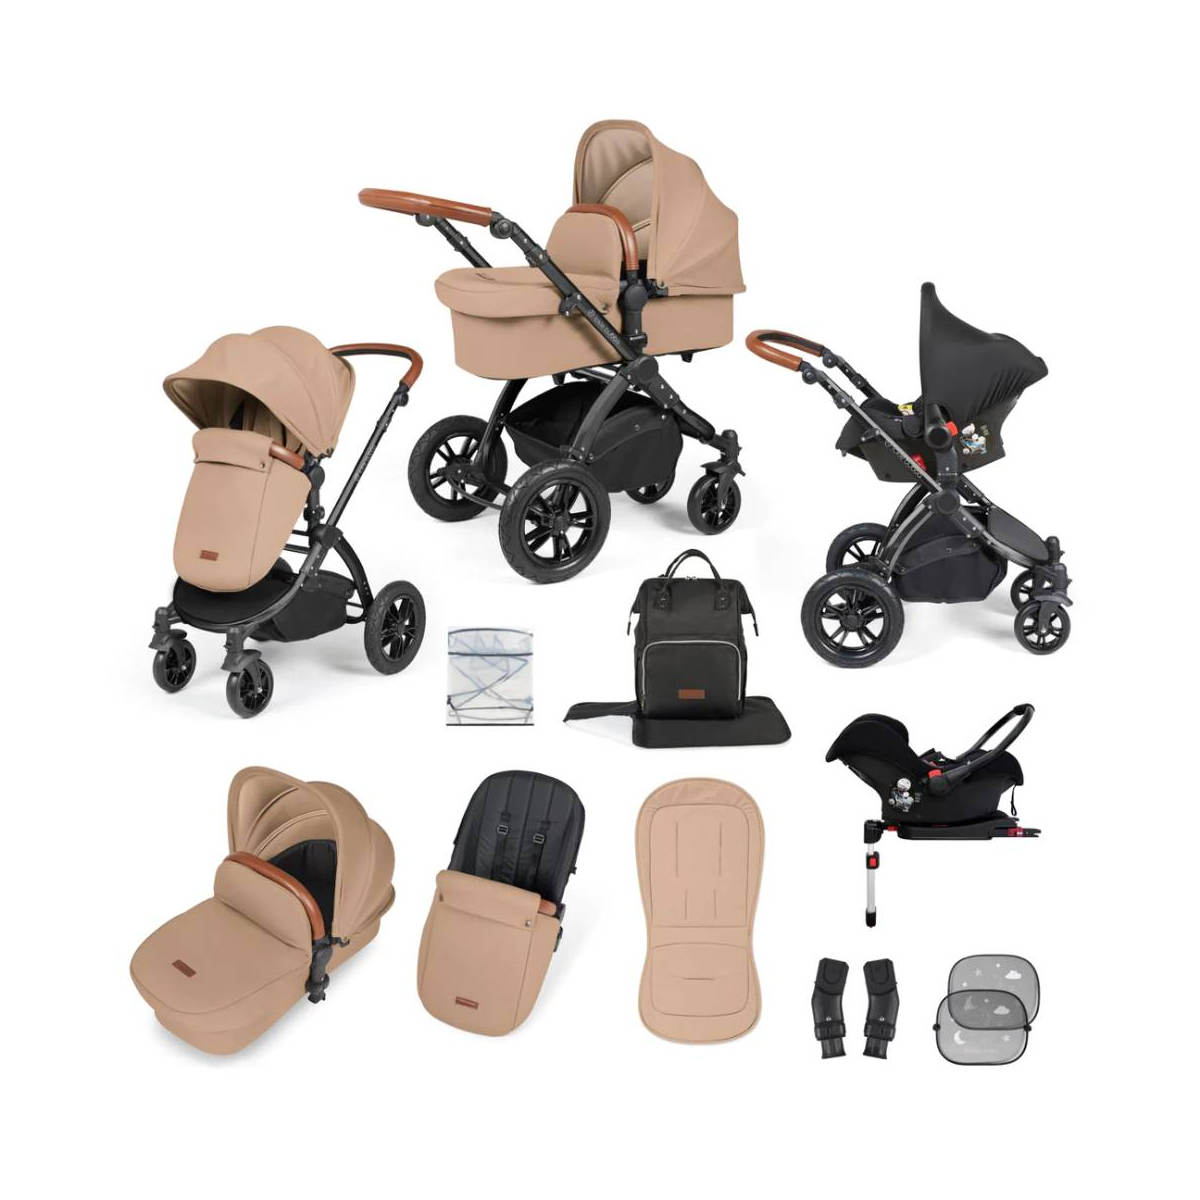 Ickle Bubba Stomp Luxe Black Frame Travel System with Galaxy Carseat & Isofix Base